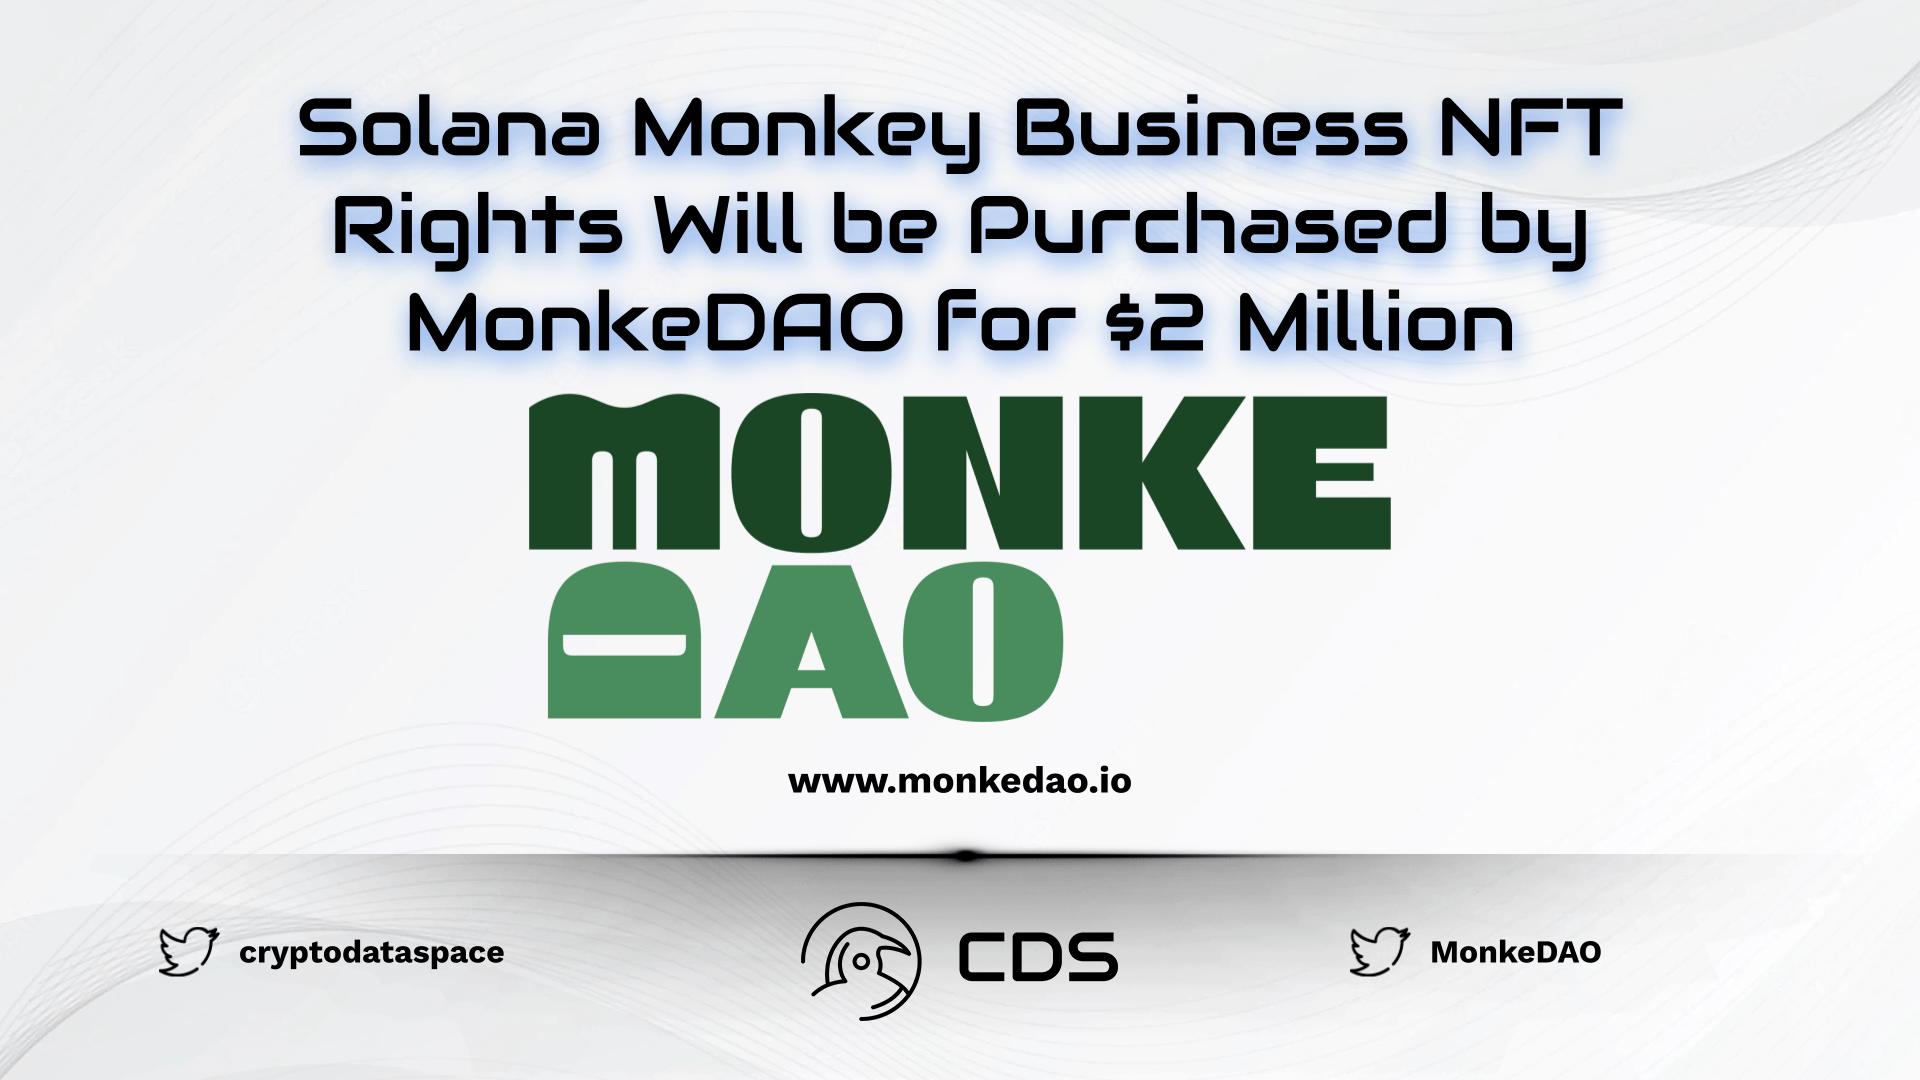 Solana Monkey Business NFT Rights Will be Purchased by MonkeDAO for $2 Million